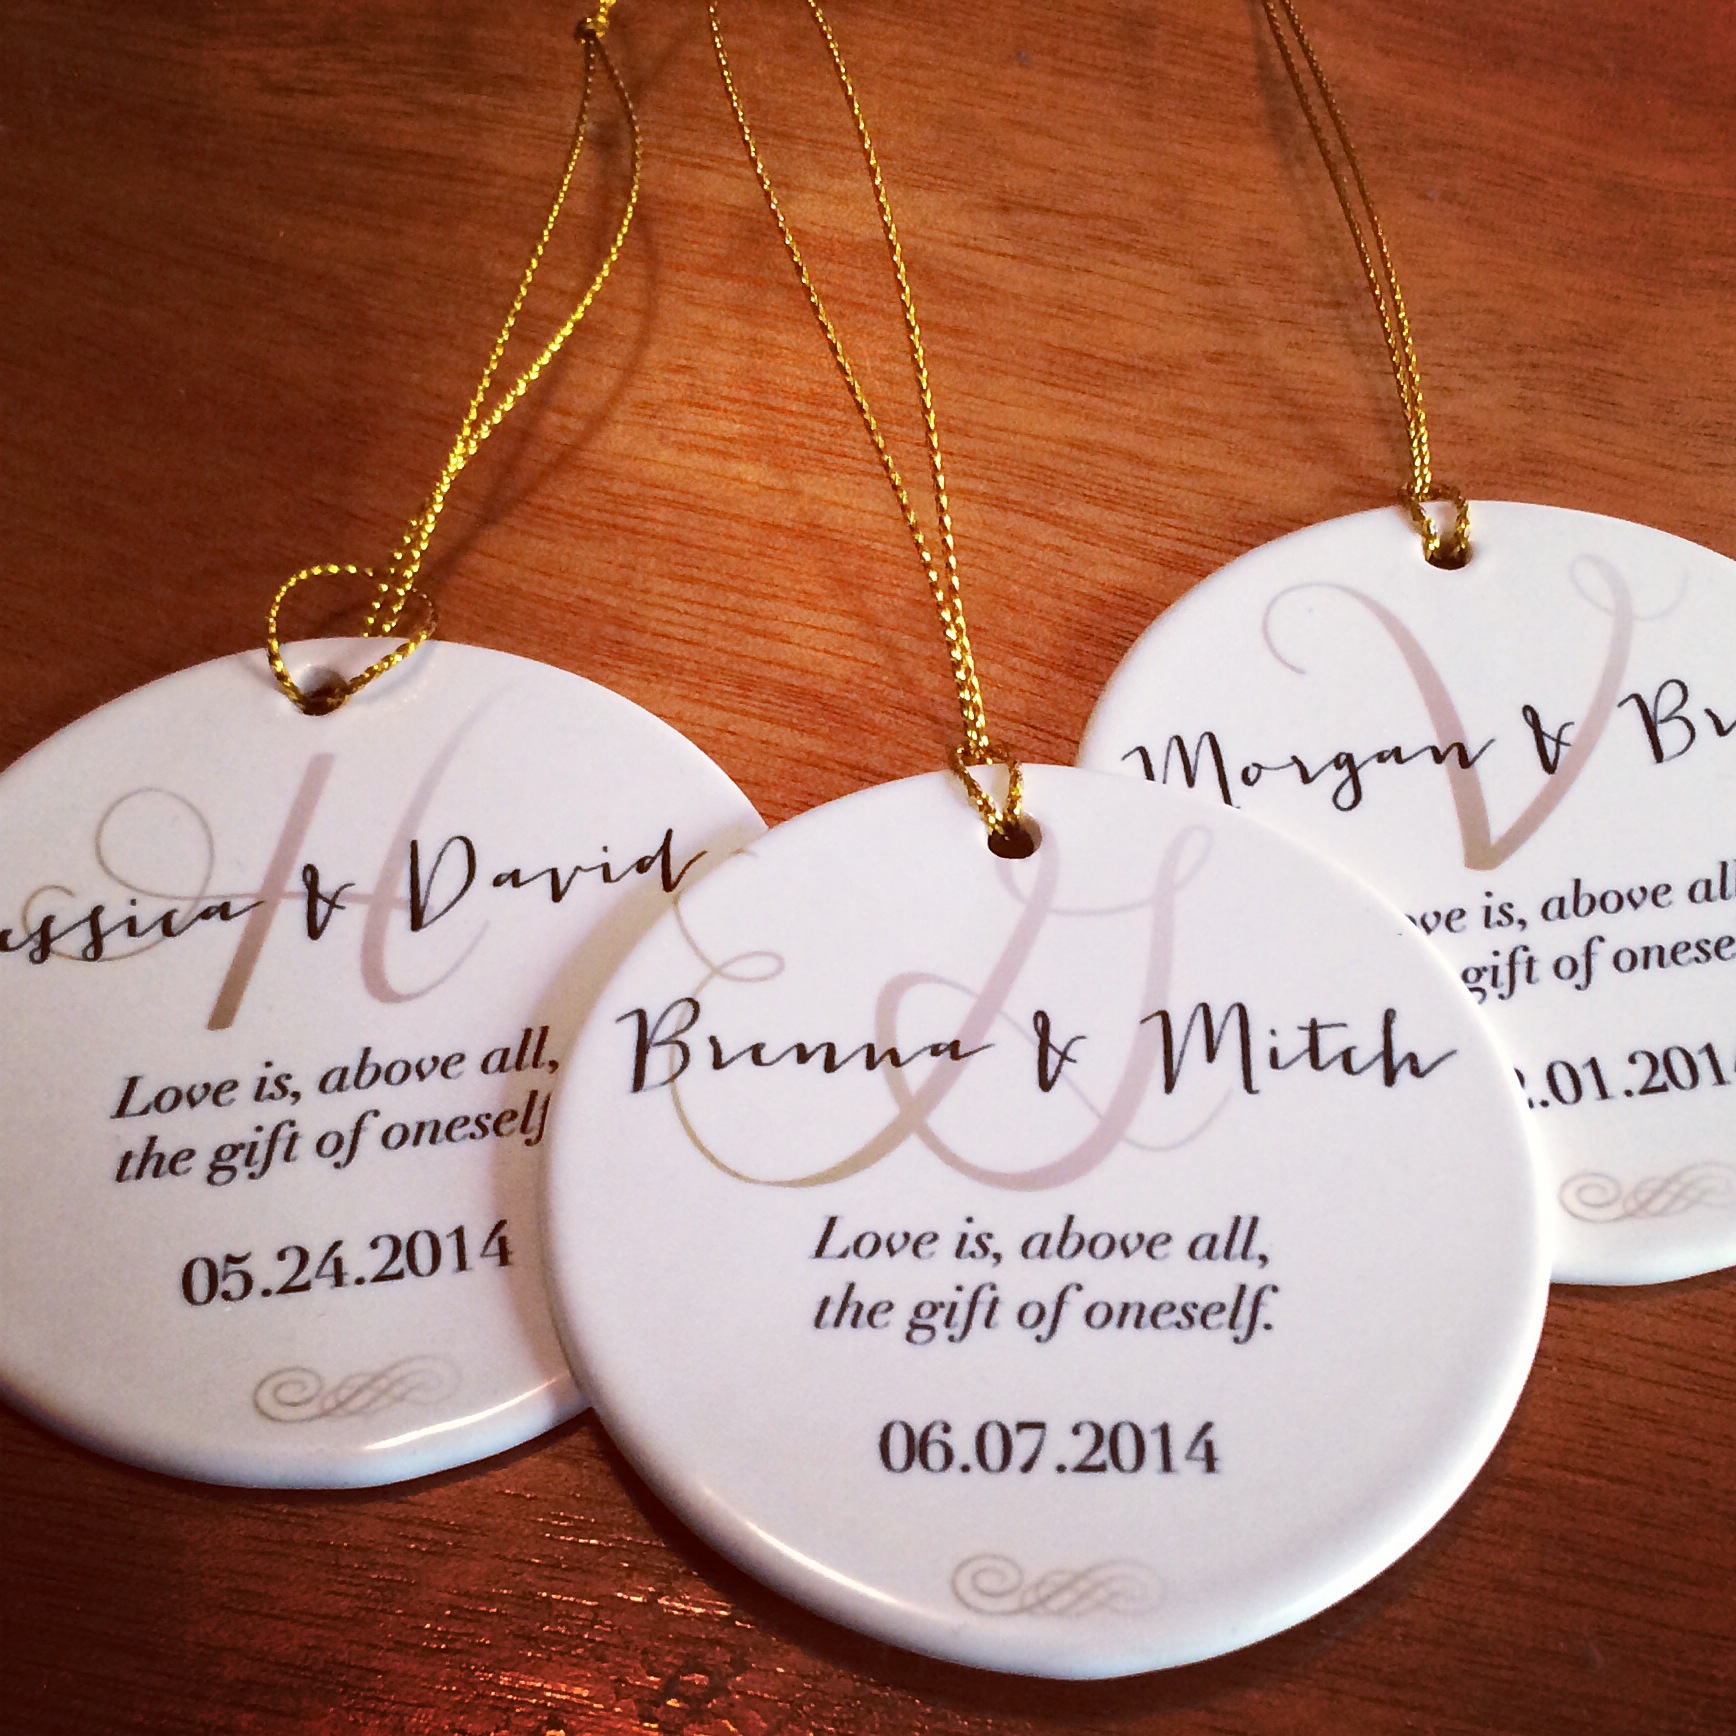 Porcelain Ornaments made with sublimation printing